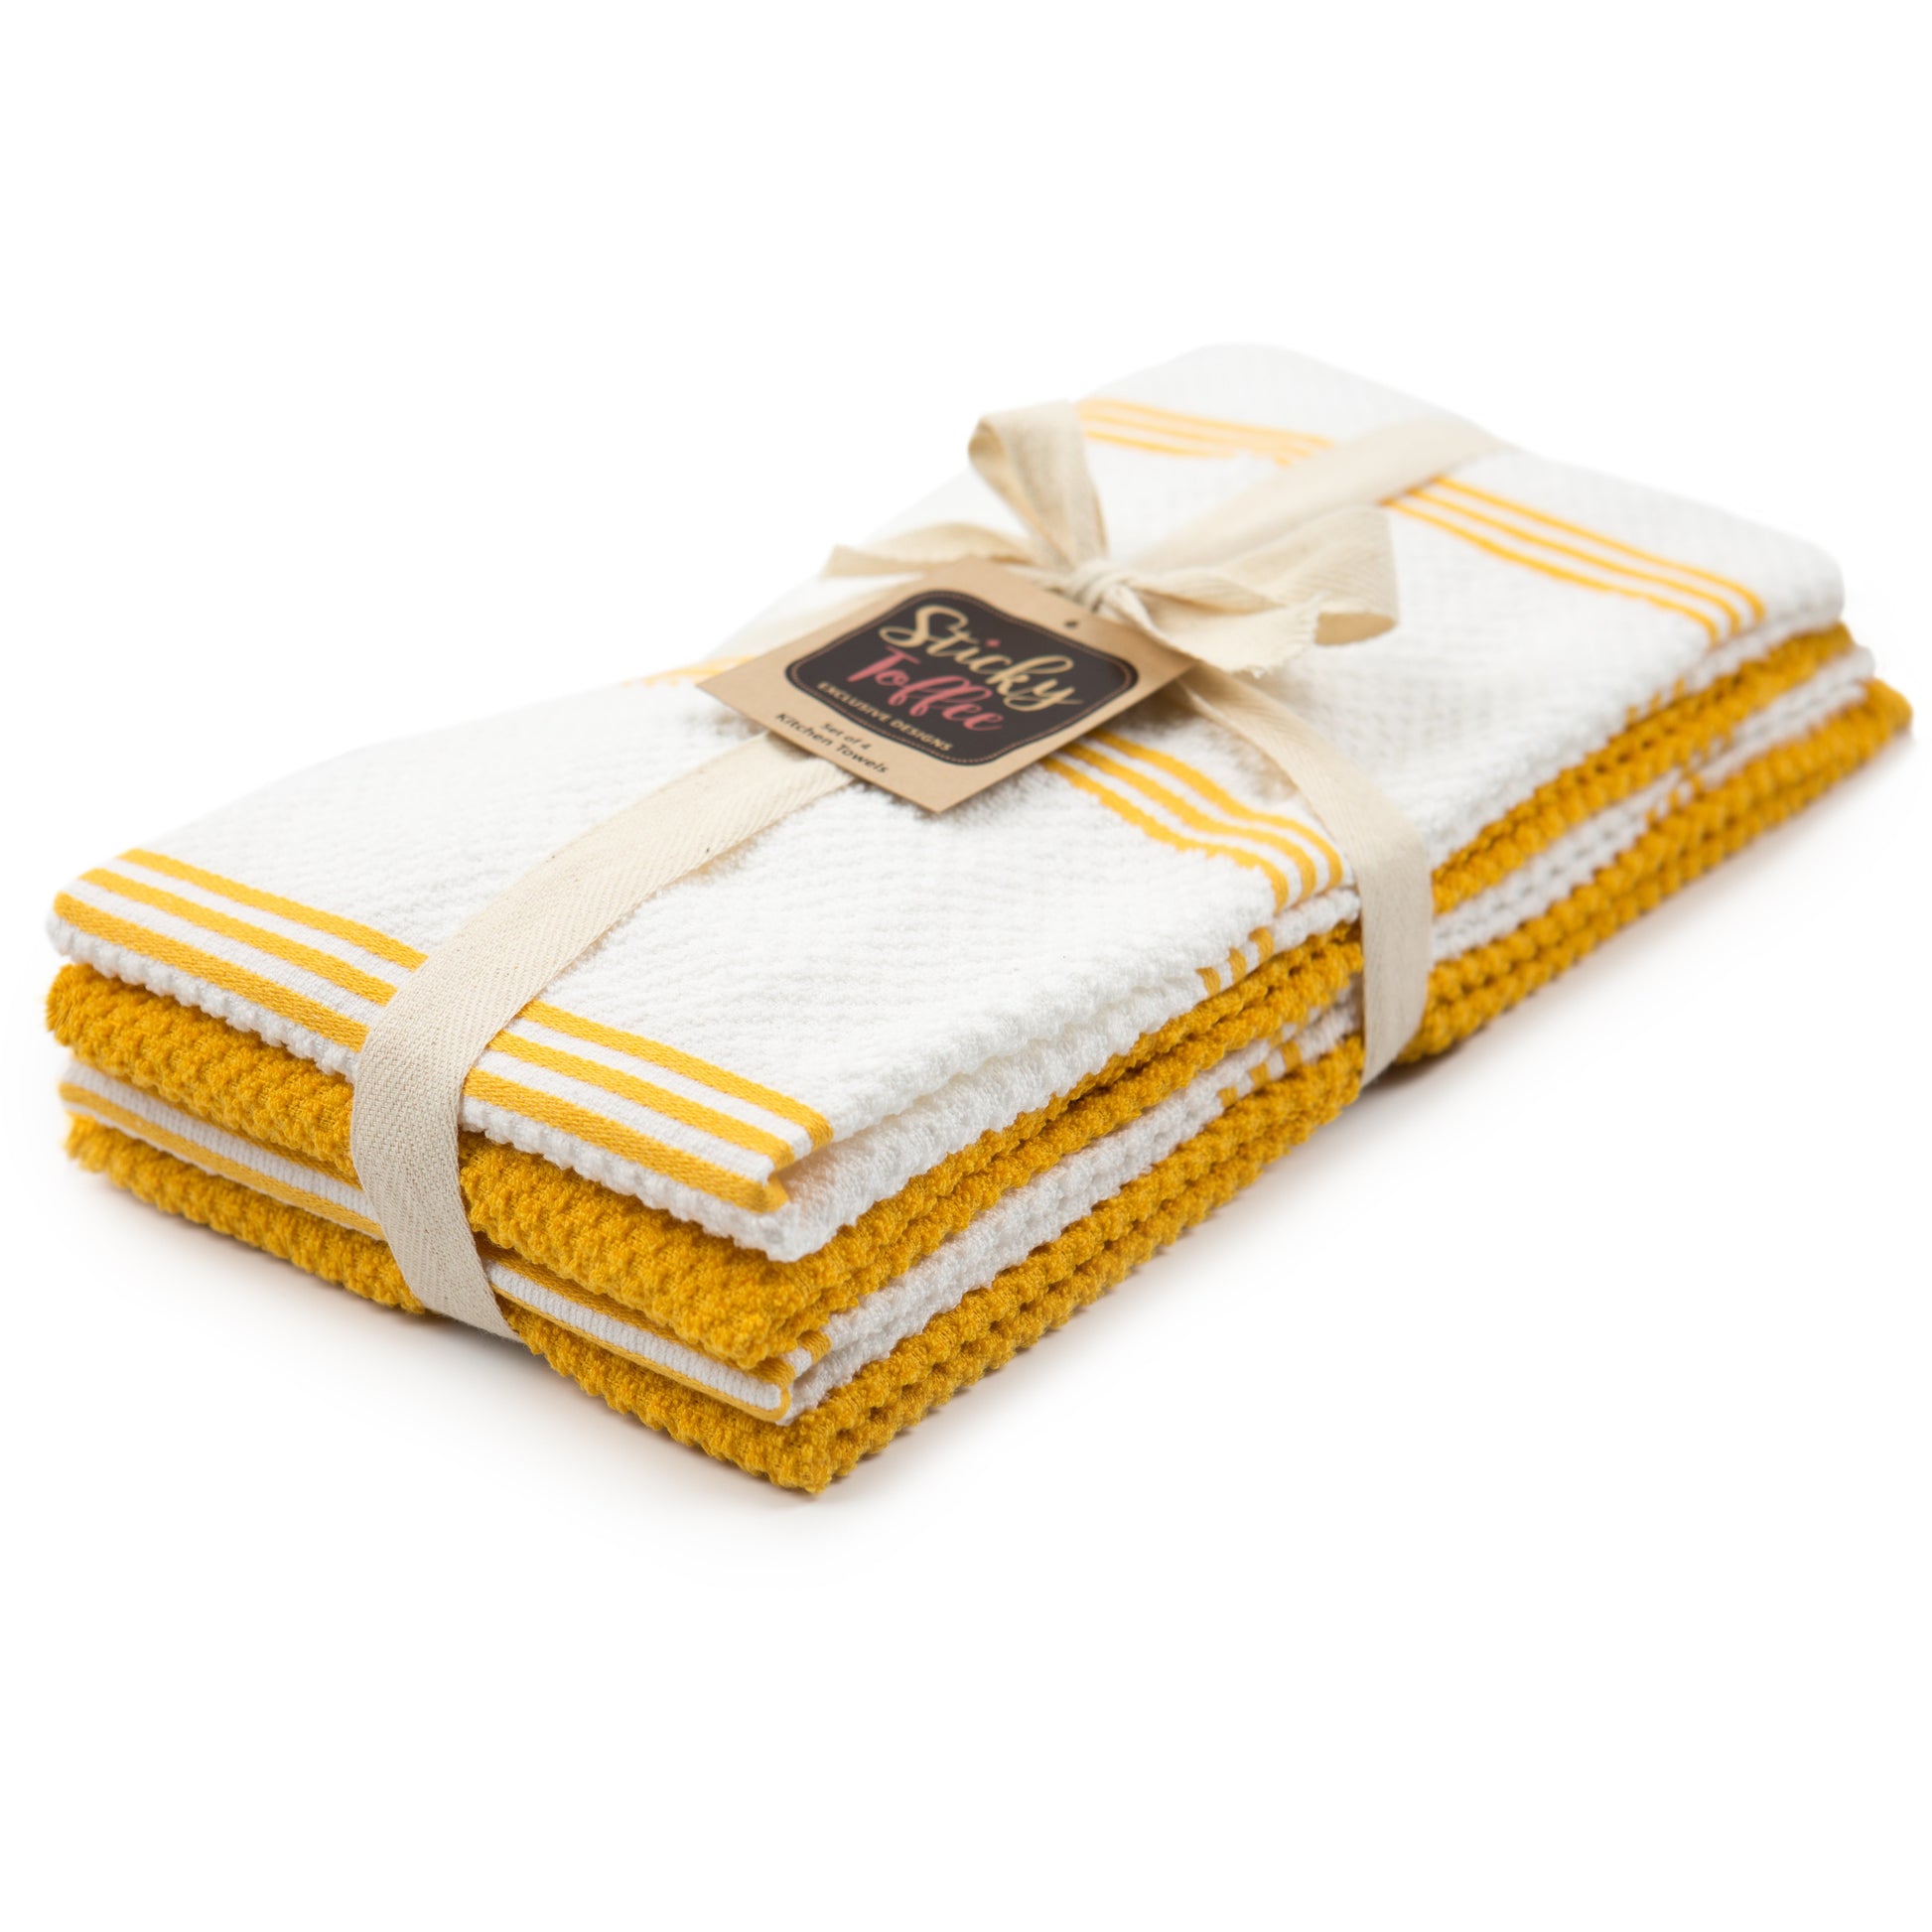 Sticky Toffee Mixed Pack Kitchen Dish Towels, 4 Pack, 28 x 16